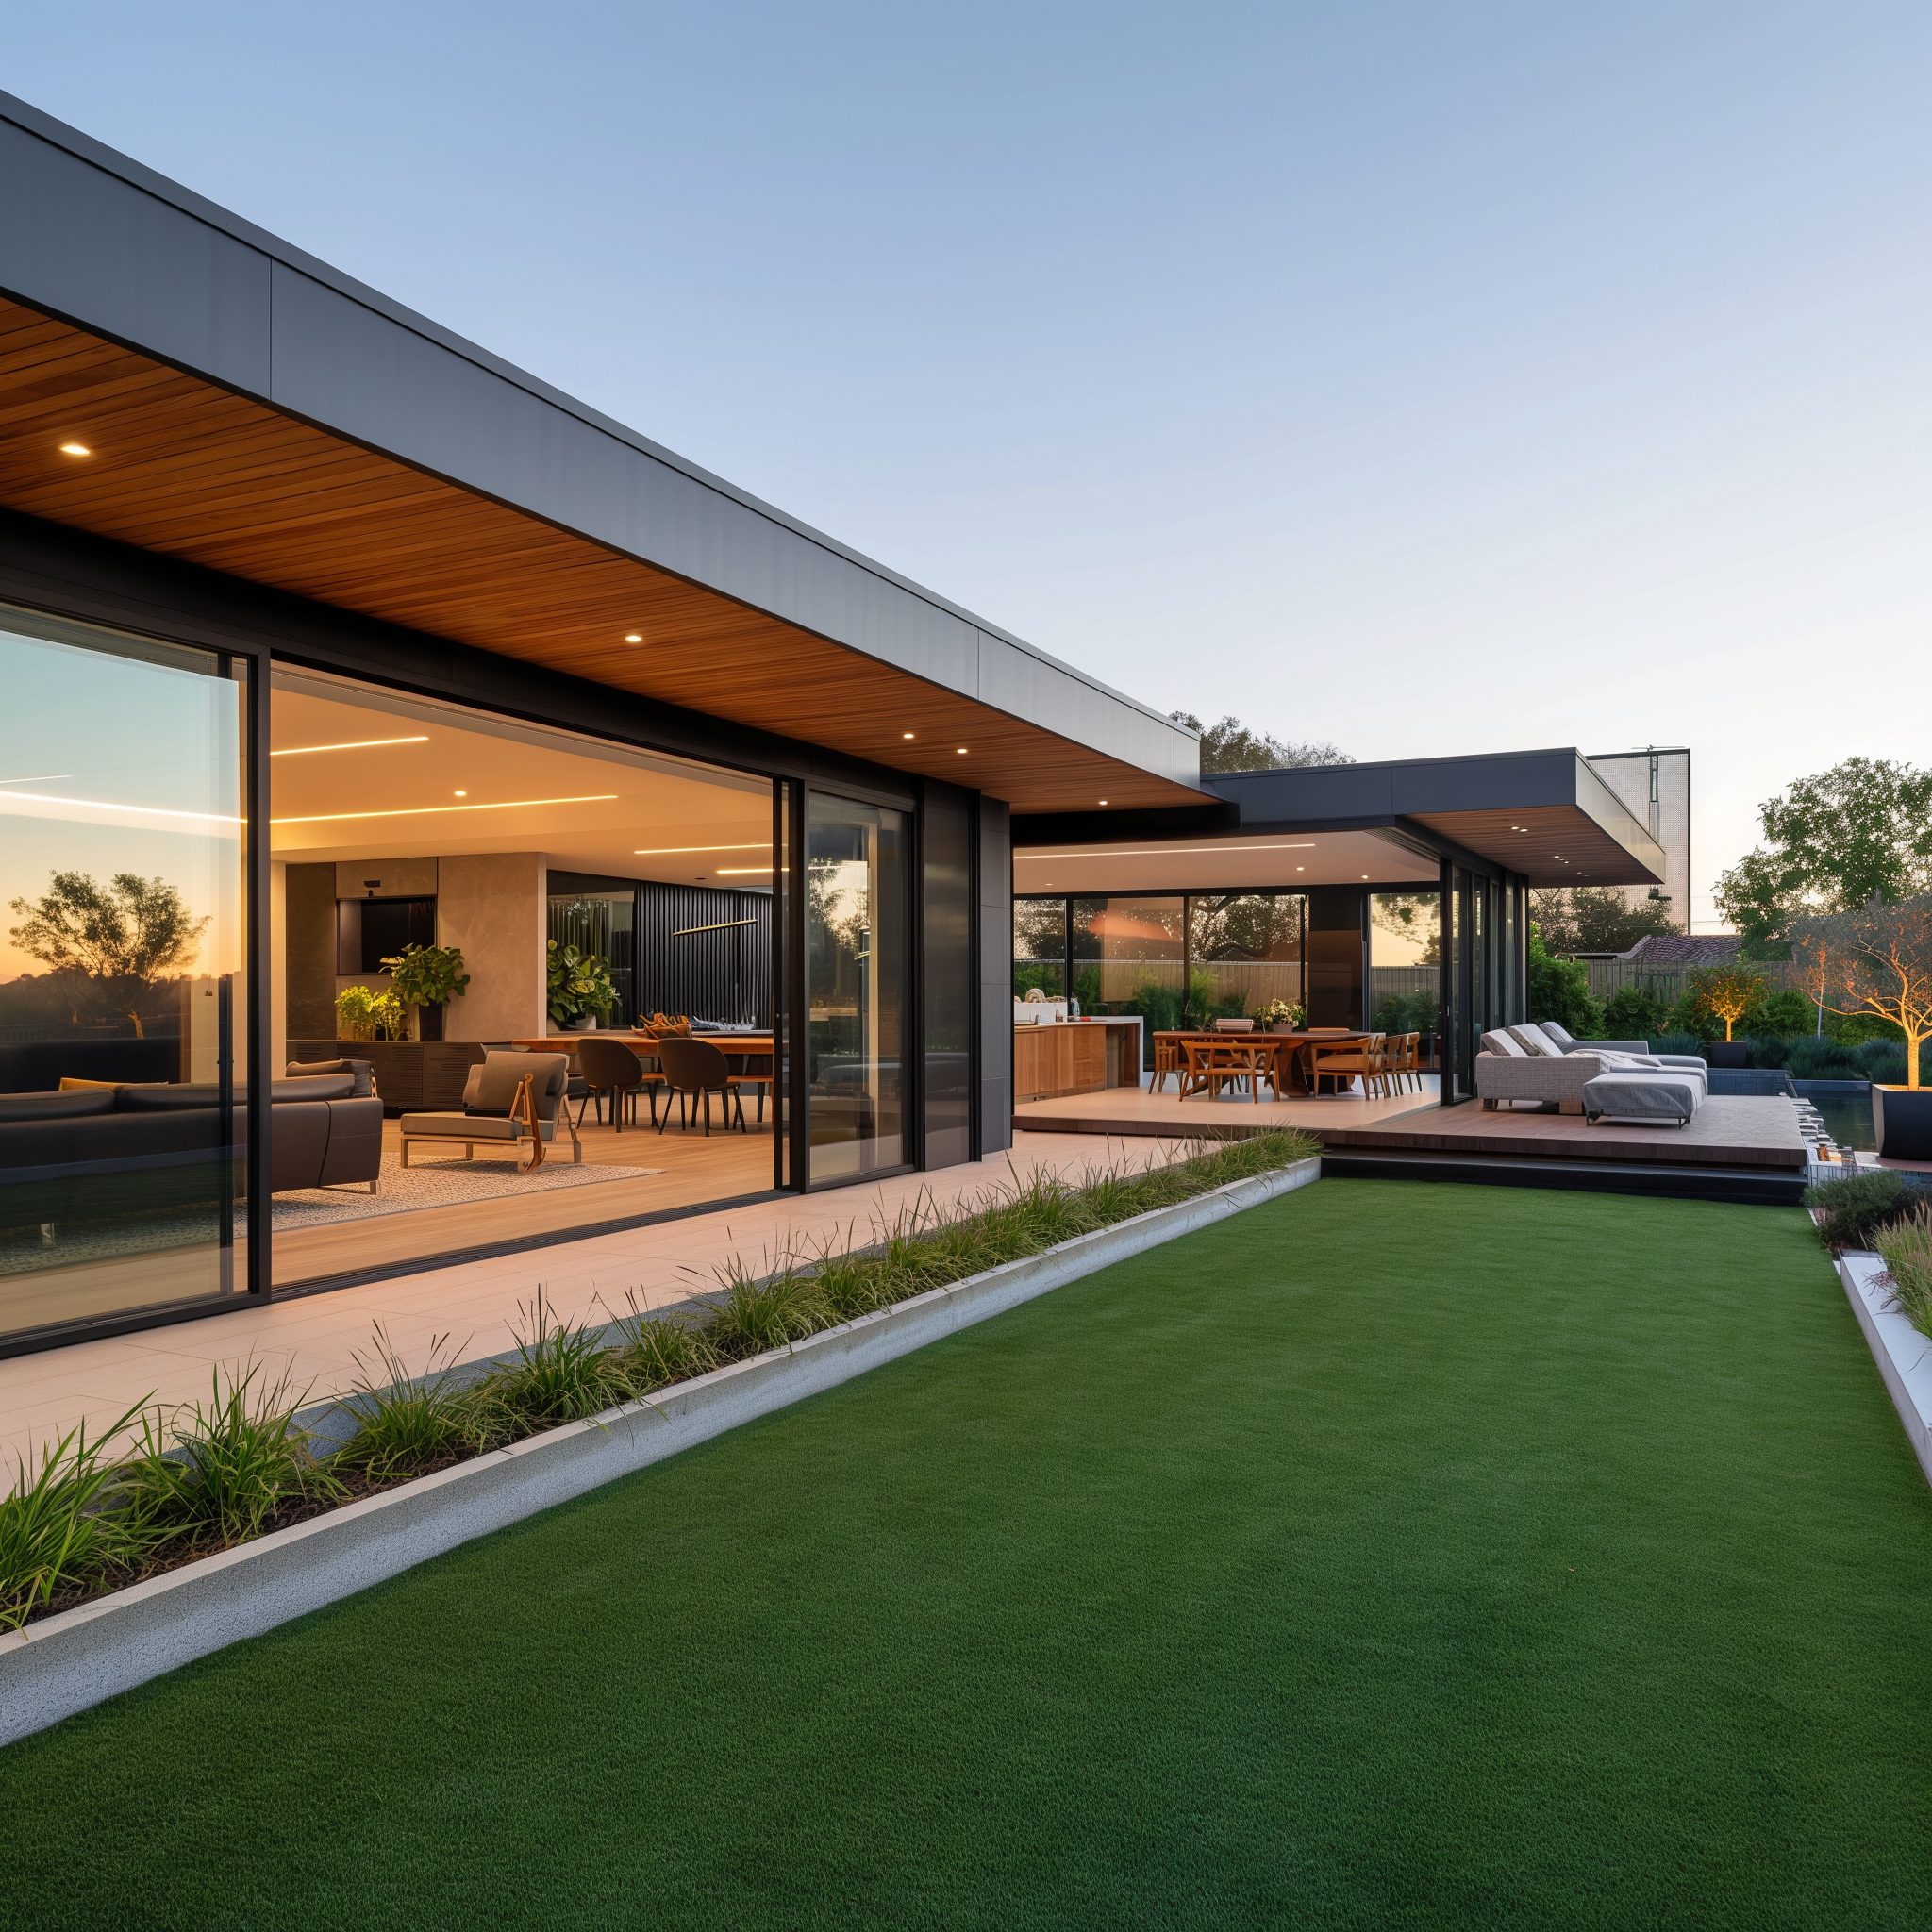 Modern house with large windows and a well-manicured lawn at dusk, ideal for a real estate avatar.